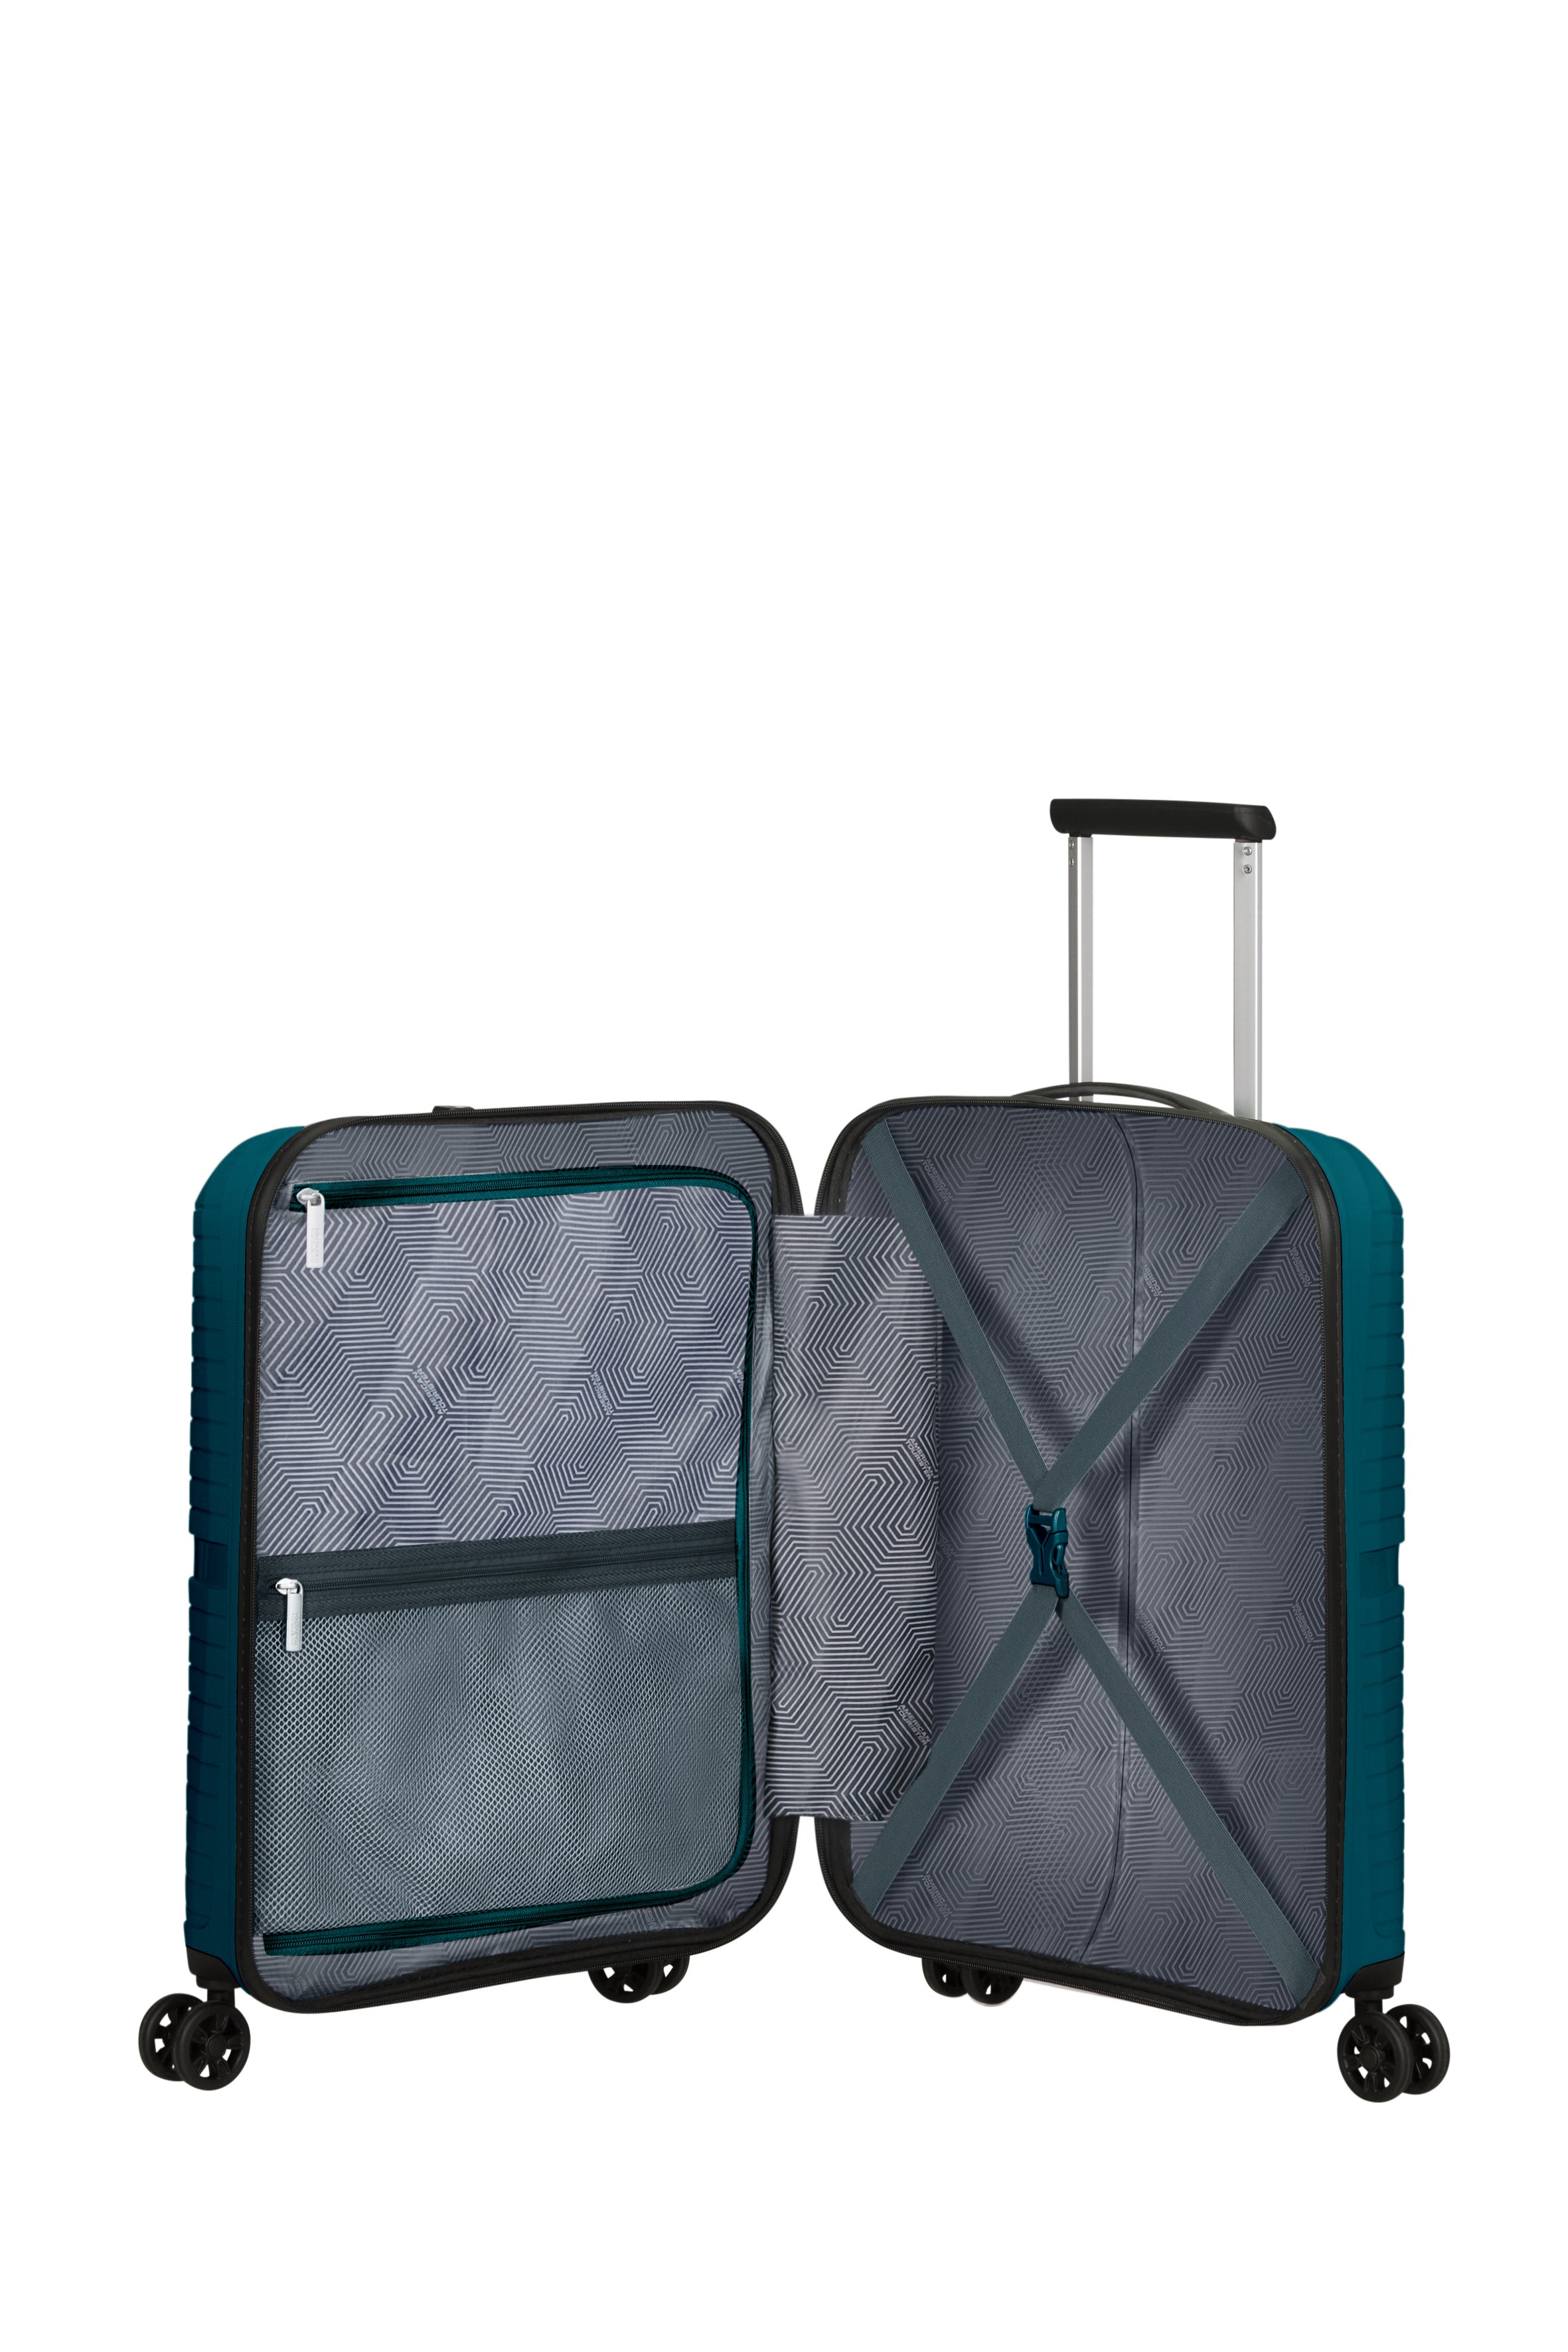 American Tourister - Airconic 55cm Small Suitcase - Deep Ocean-6